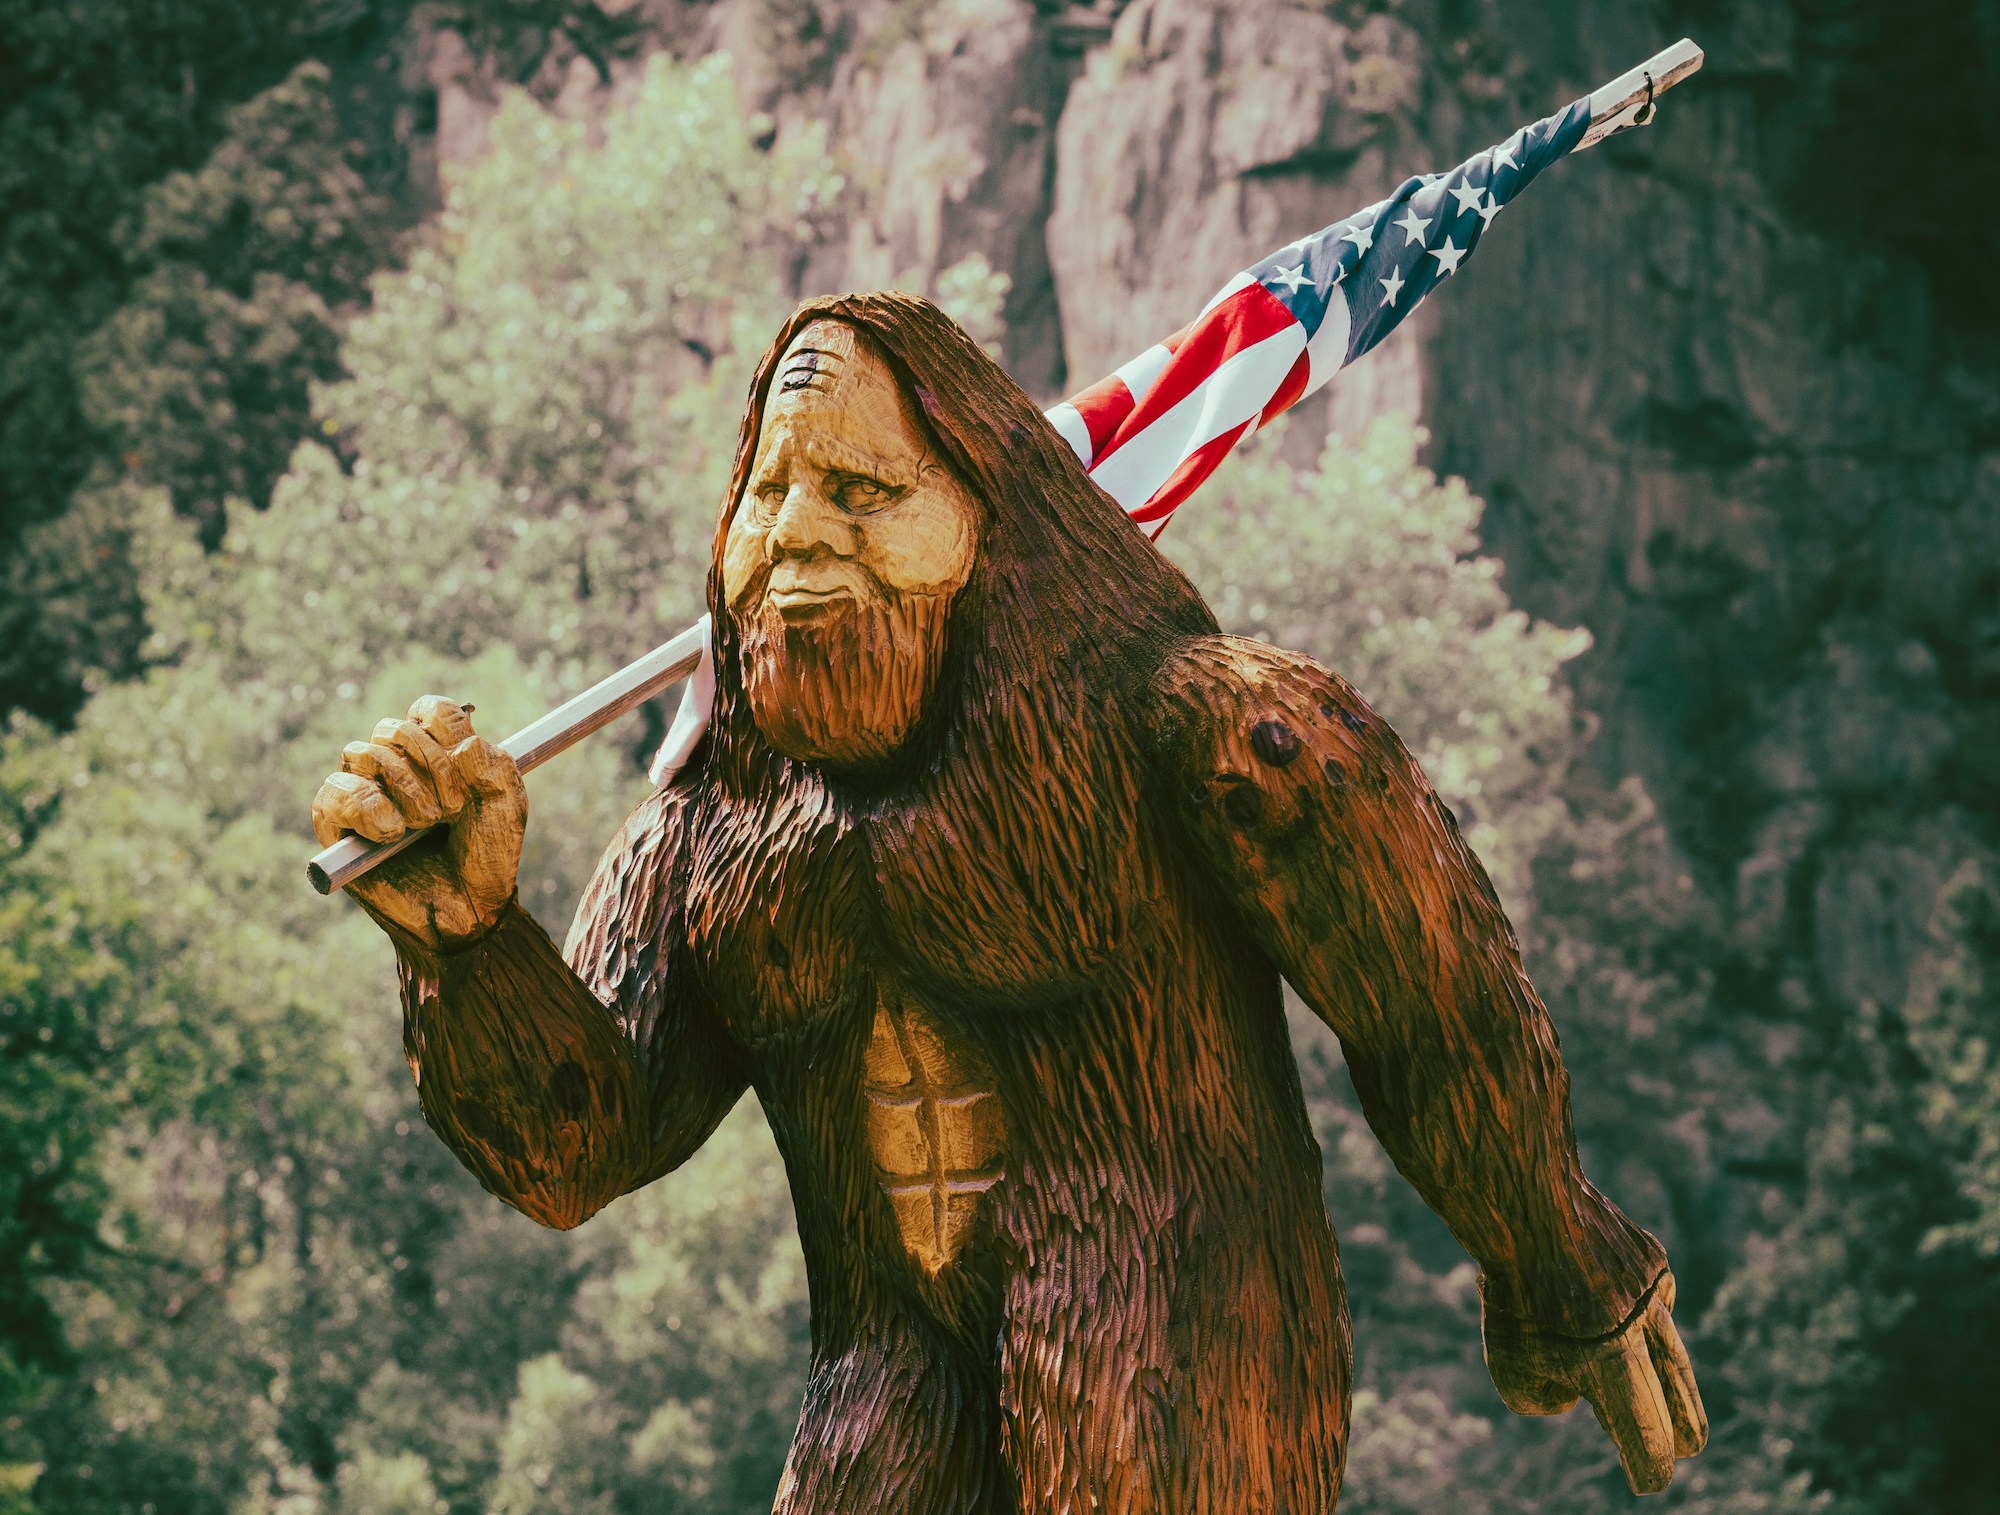 Get Squatchy with Bigfoot Days in April at Estes Park, CO